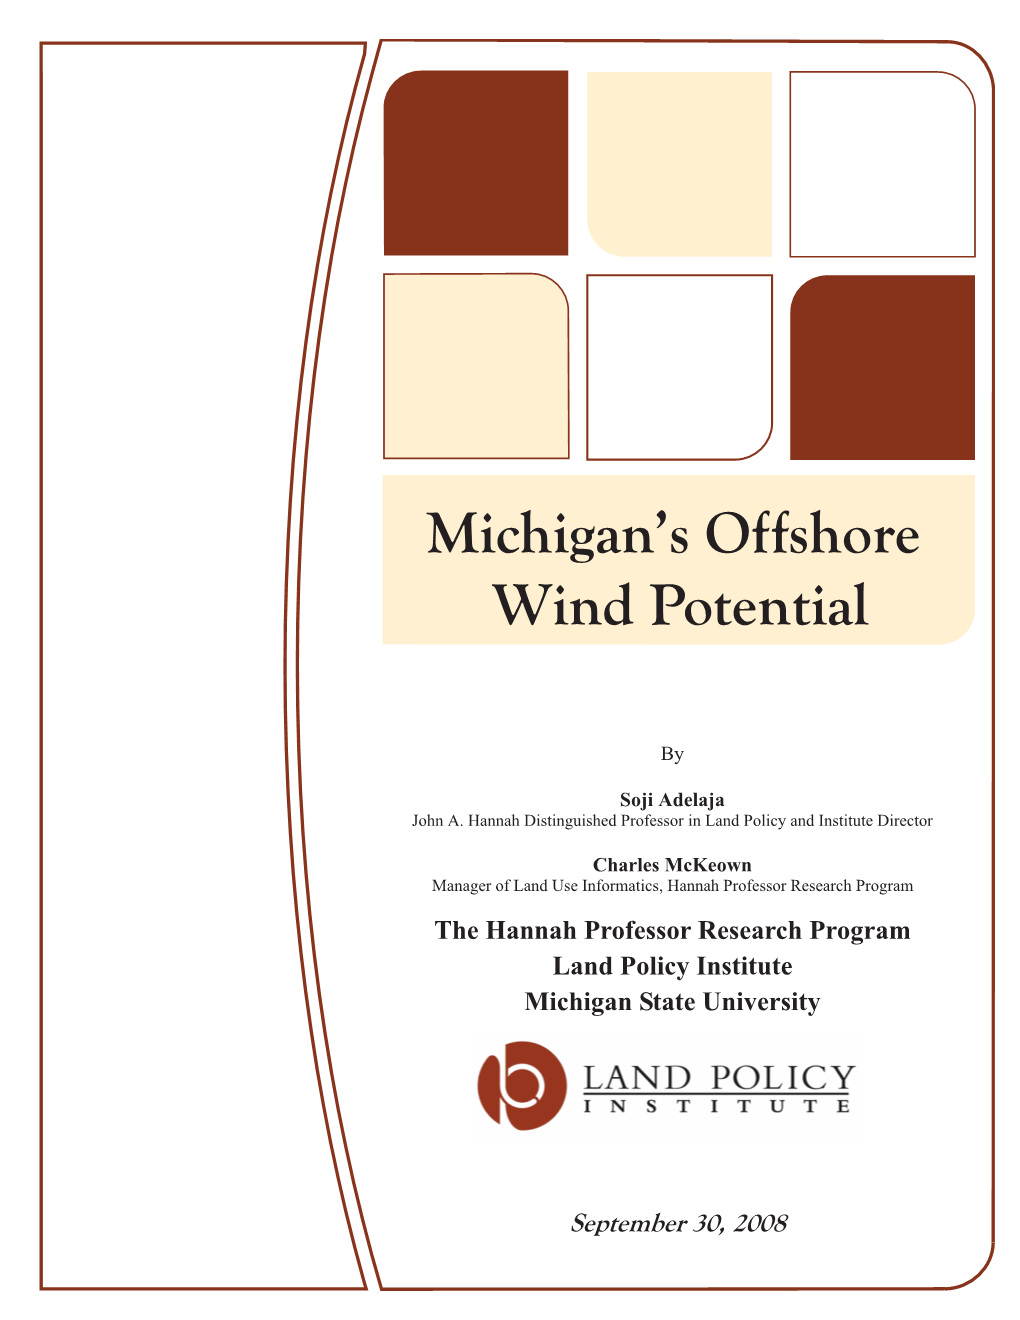 2008/09/30-Michigan's Offshore Wind Potential